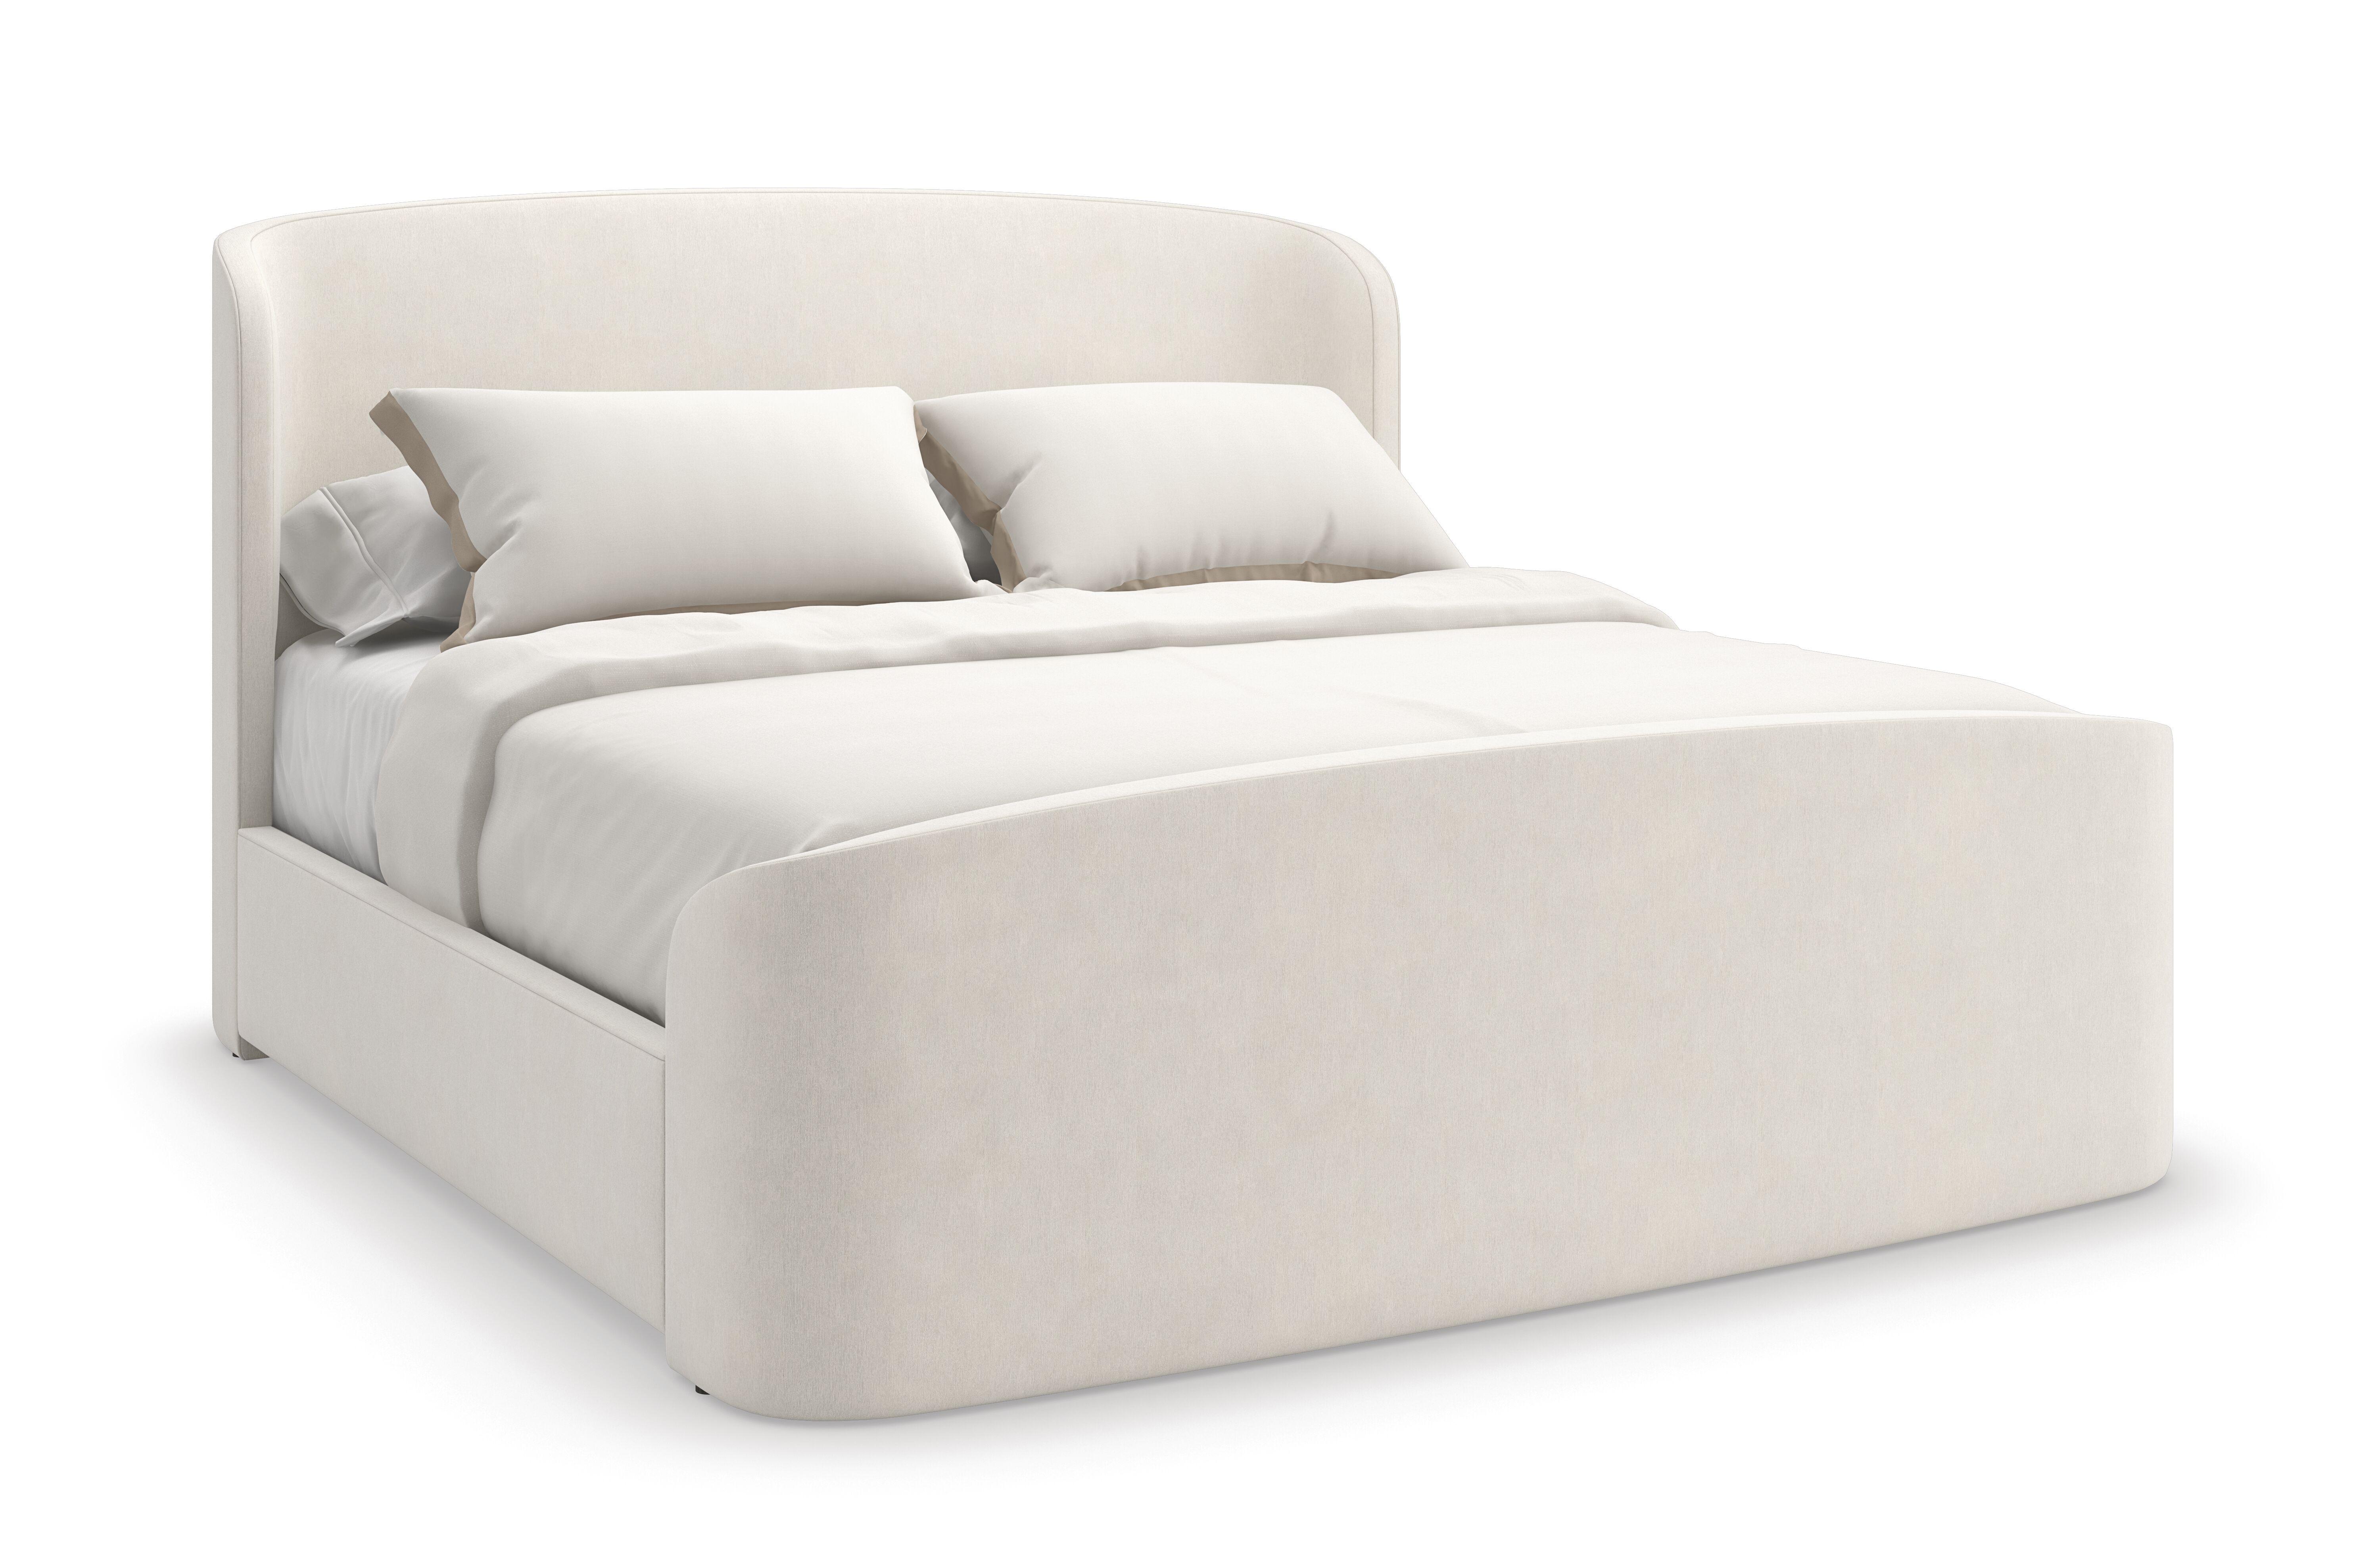 

    
Fully Upholstered Ivory Fabric Queen Bed SOFT EMBRACE  by Caracole
